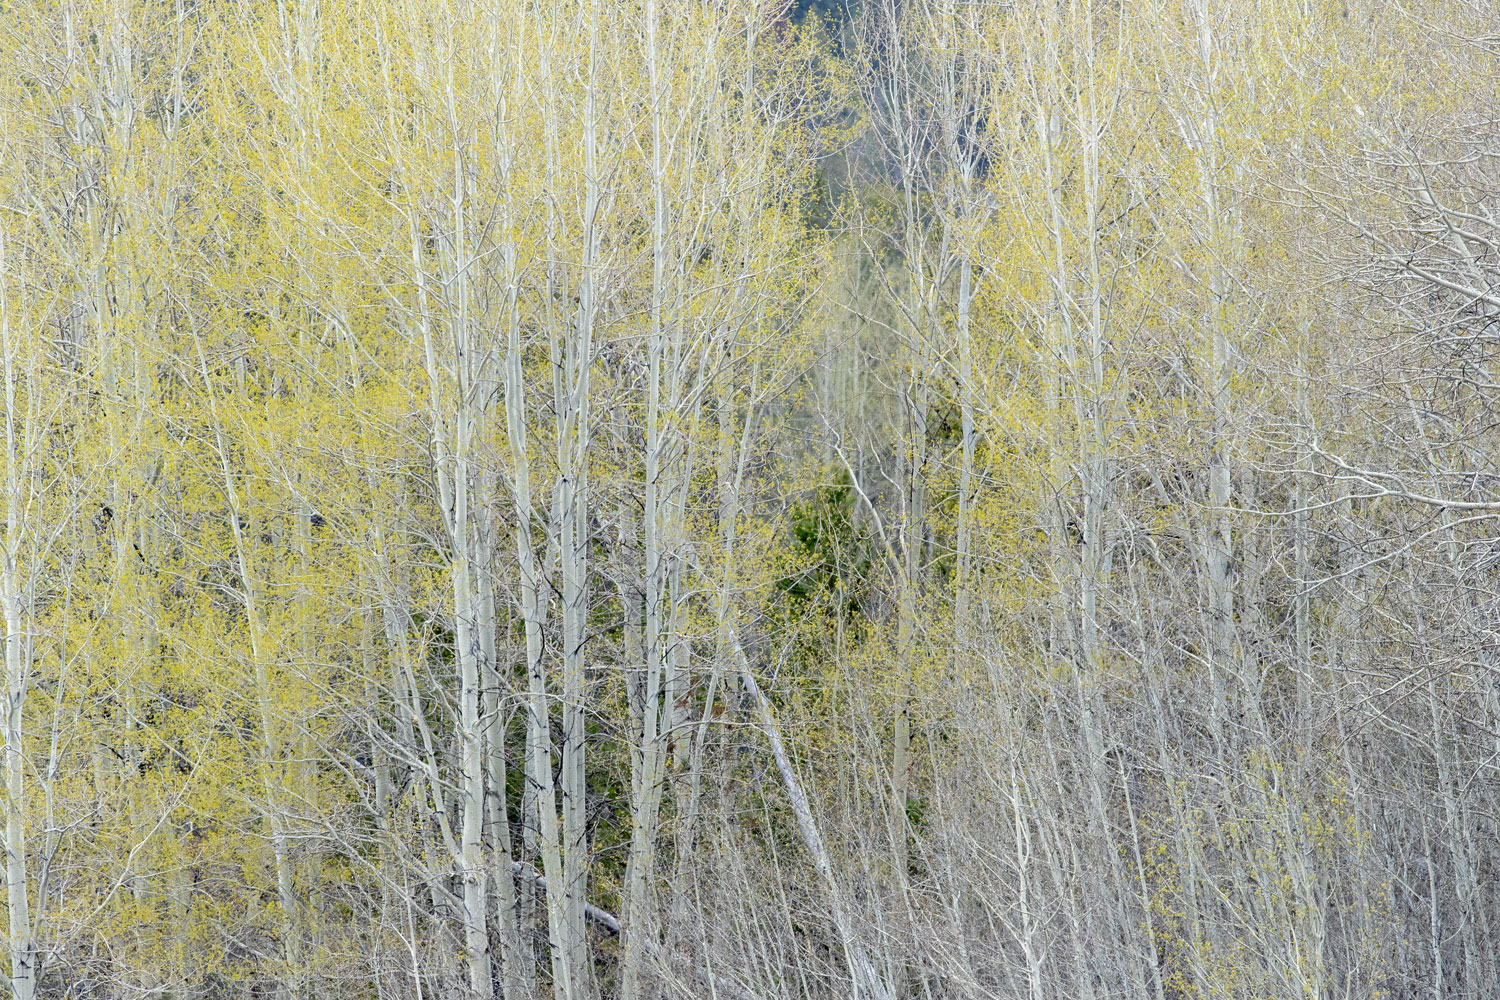 Pines in a Spring Aspen Grove